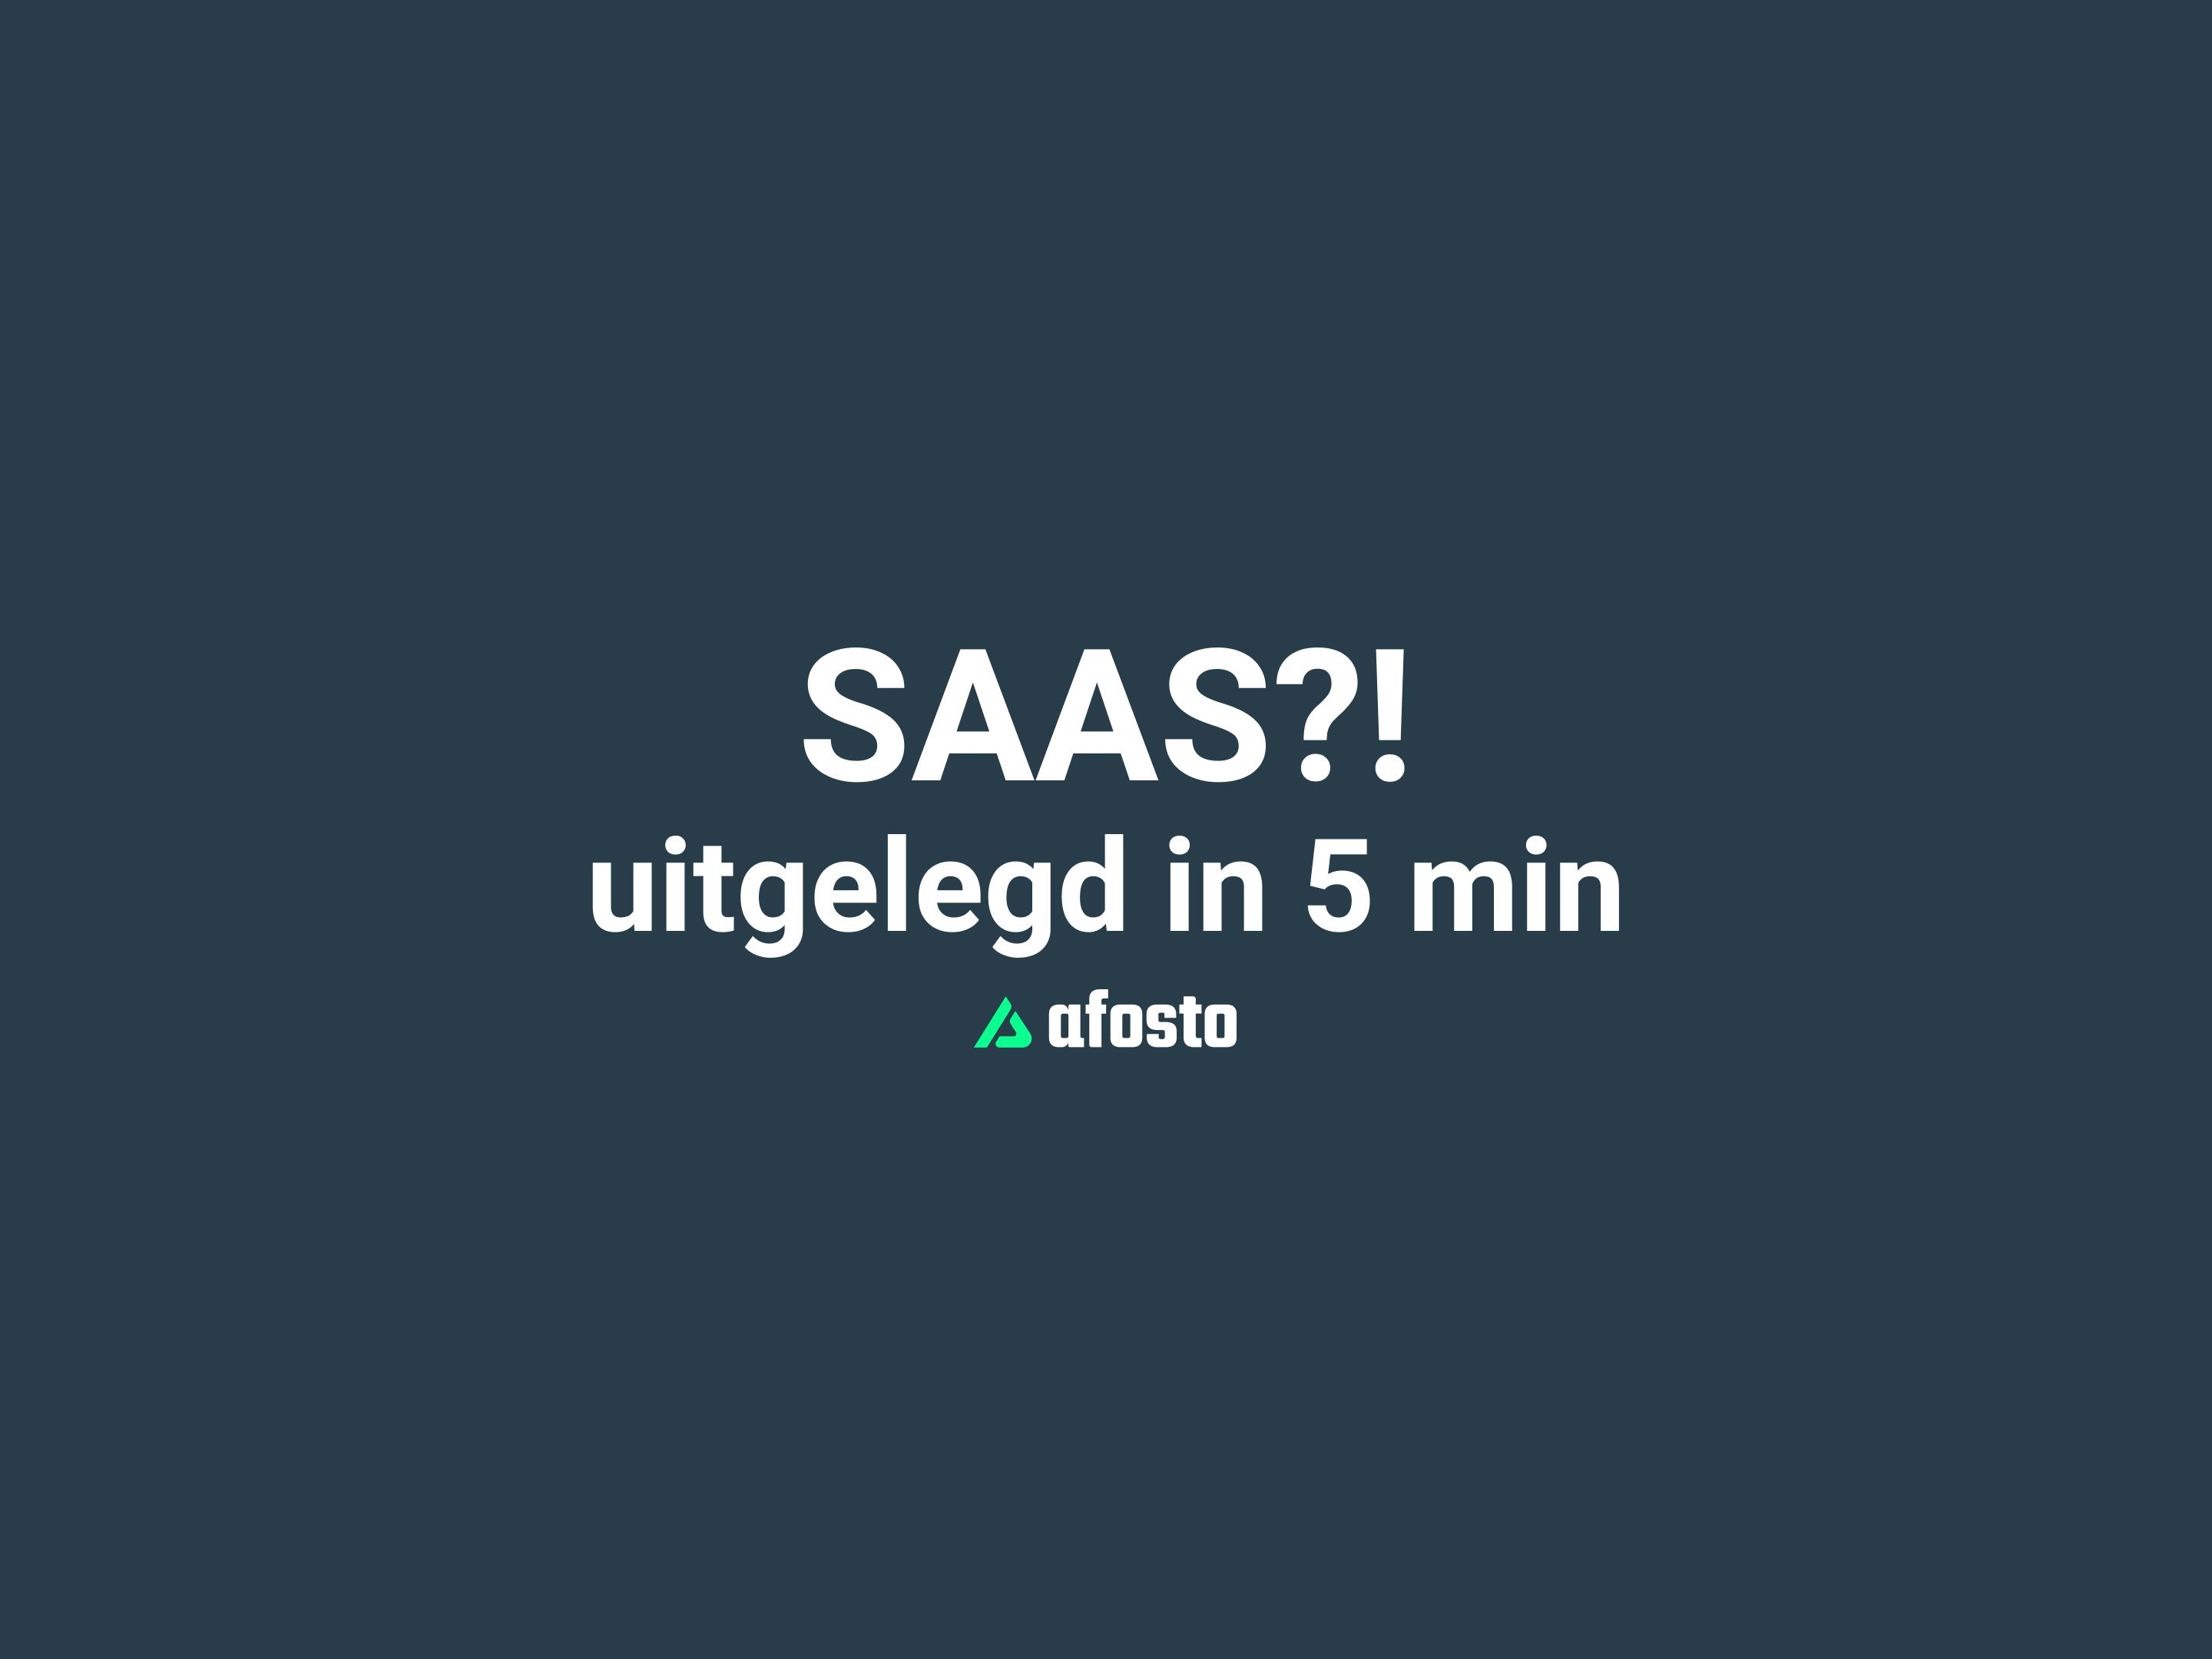 Saas explained in 5 minutes